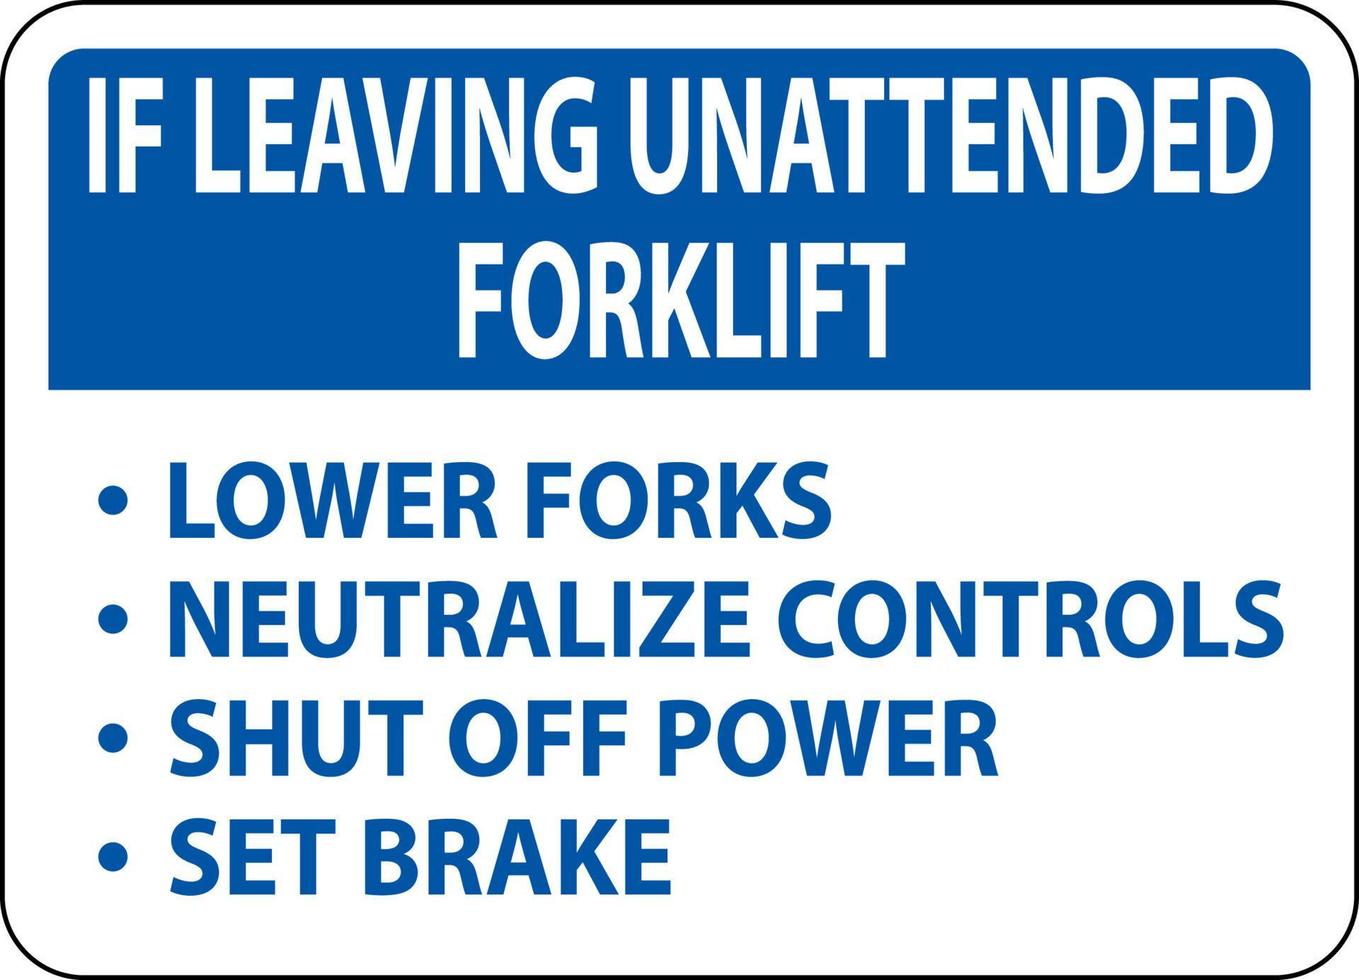 If Leaving Forklift Unattended Sign On White Background vector